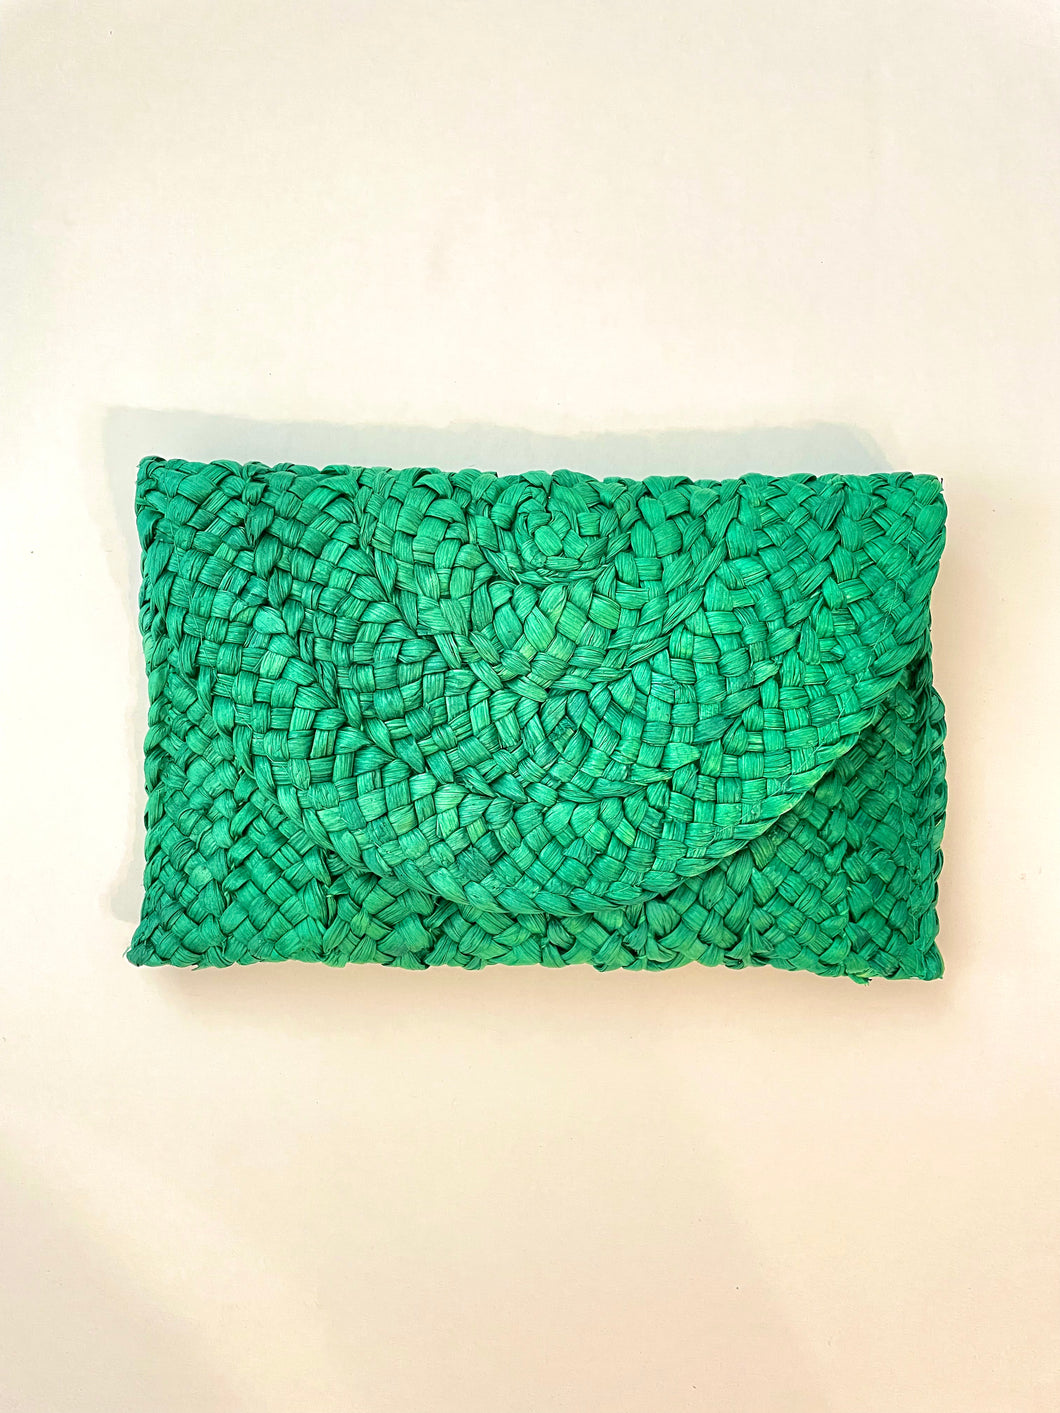 Emerald woven straw clutch. Metal clasp button closure.  9.84 x 6.69 inches. Iphone fits with room.